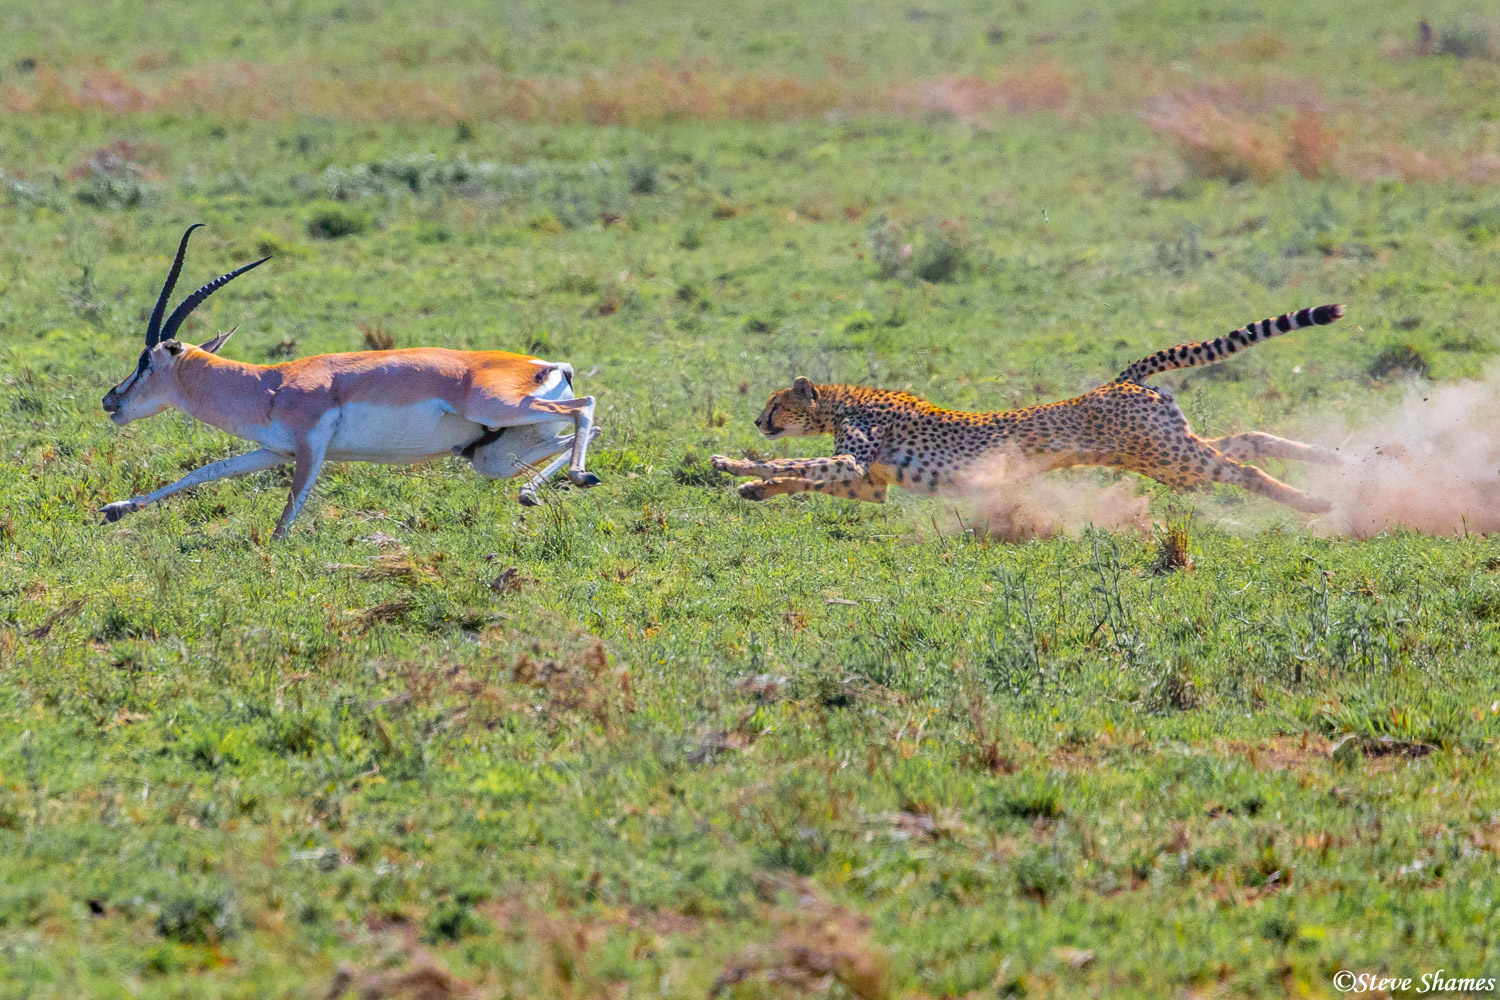 They are at full speed here. No land animal can outrun a cheetah in a sprint. All they can hope to do is outmaneuver the cheetah...